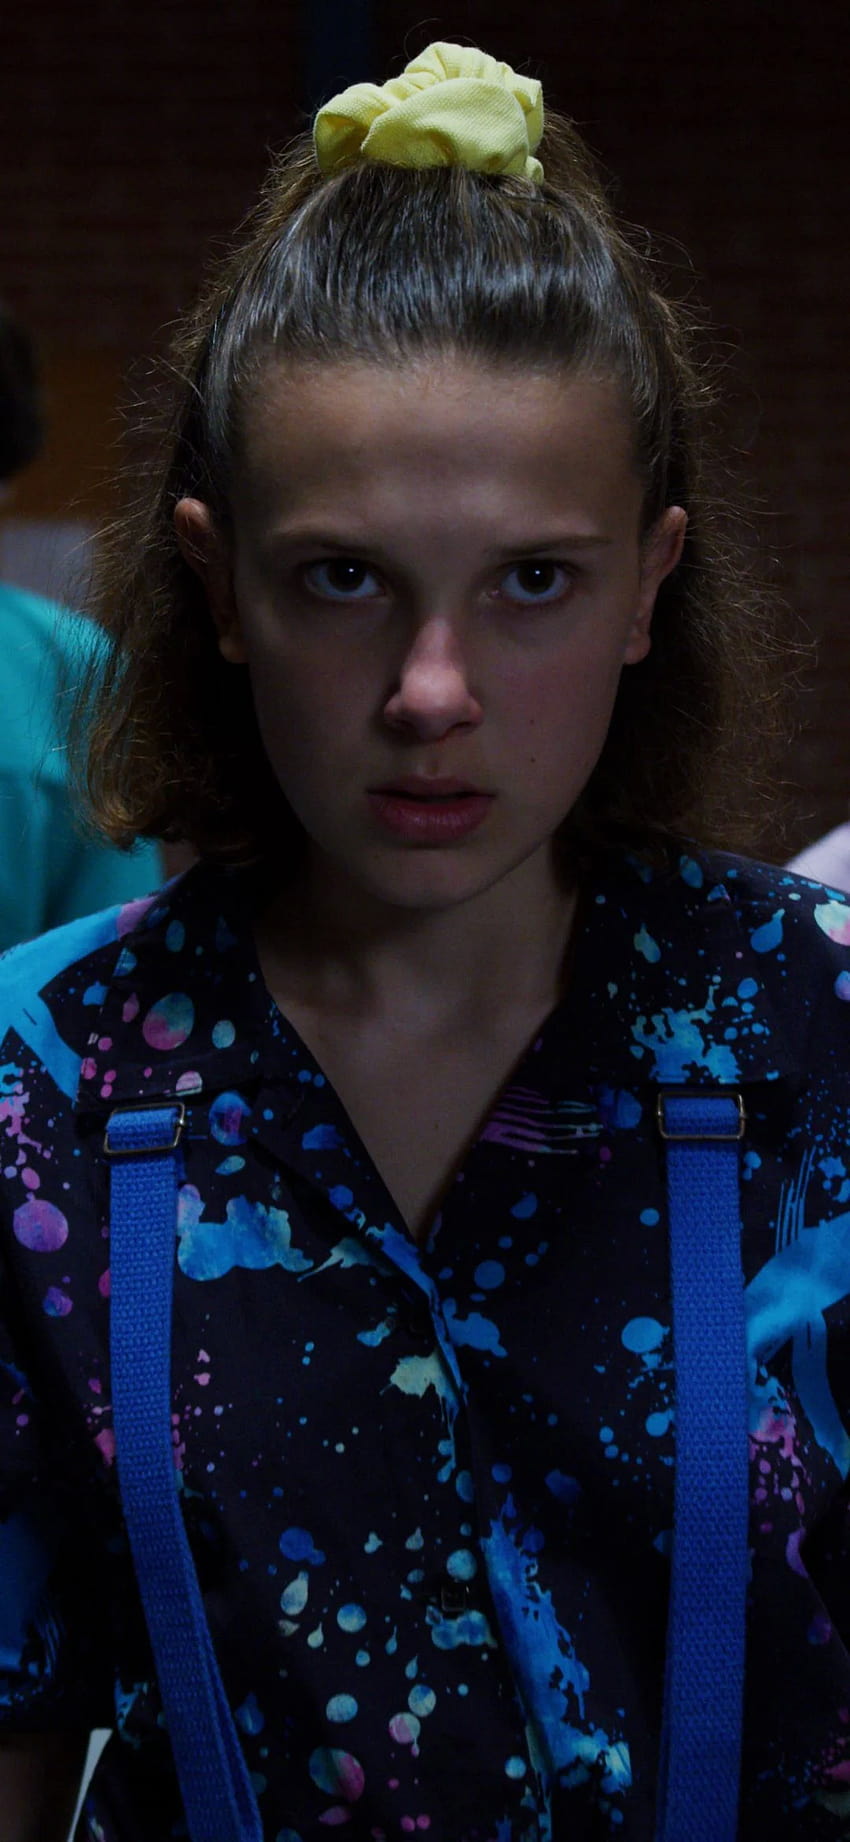 Millie Bobby Brown As Eleven Millie Bobby Brown As Eleven Stranger Things 3 Poster Stranger Things TV Show Home & Kitchen kurrasports Home Décor, millie bobby brown stranger things HD phone wallpaper